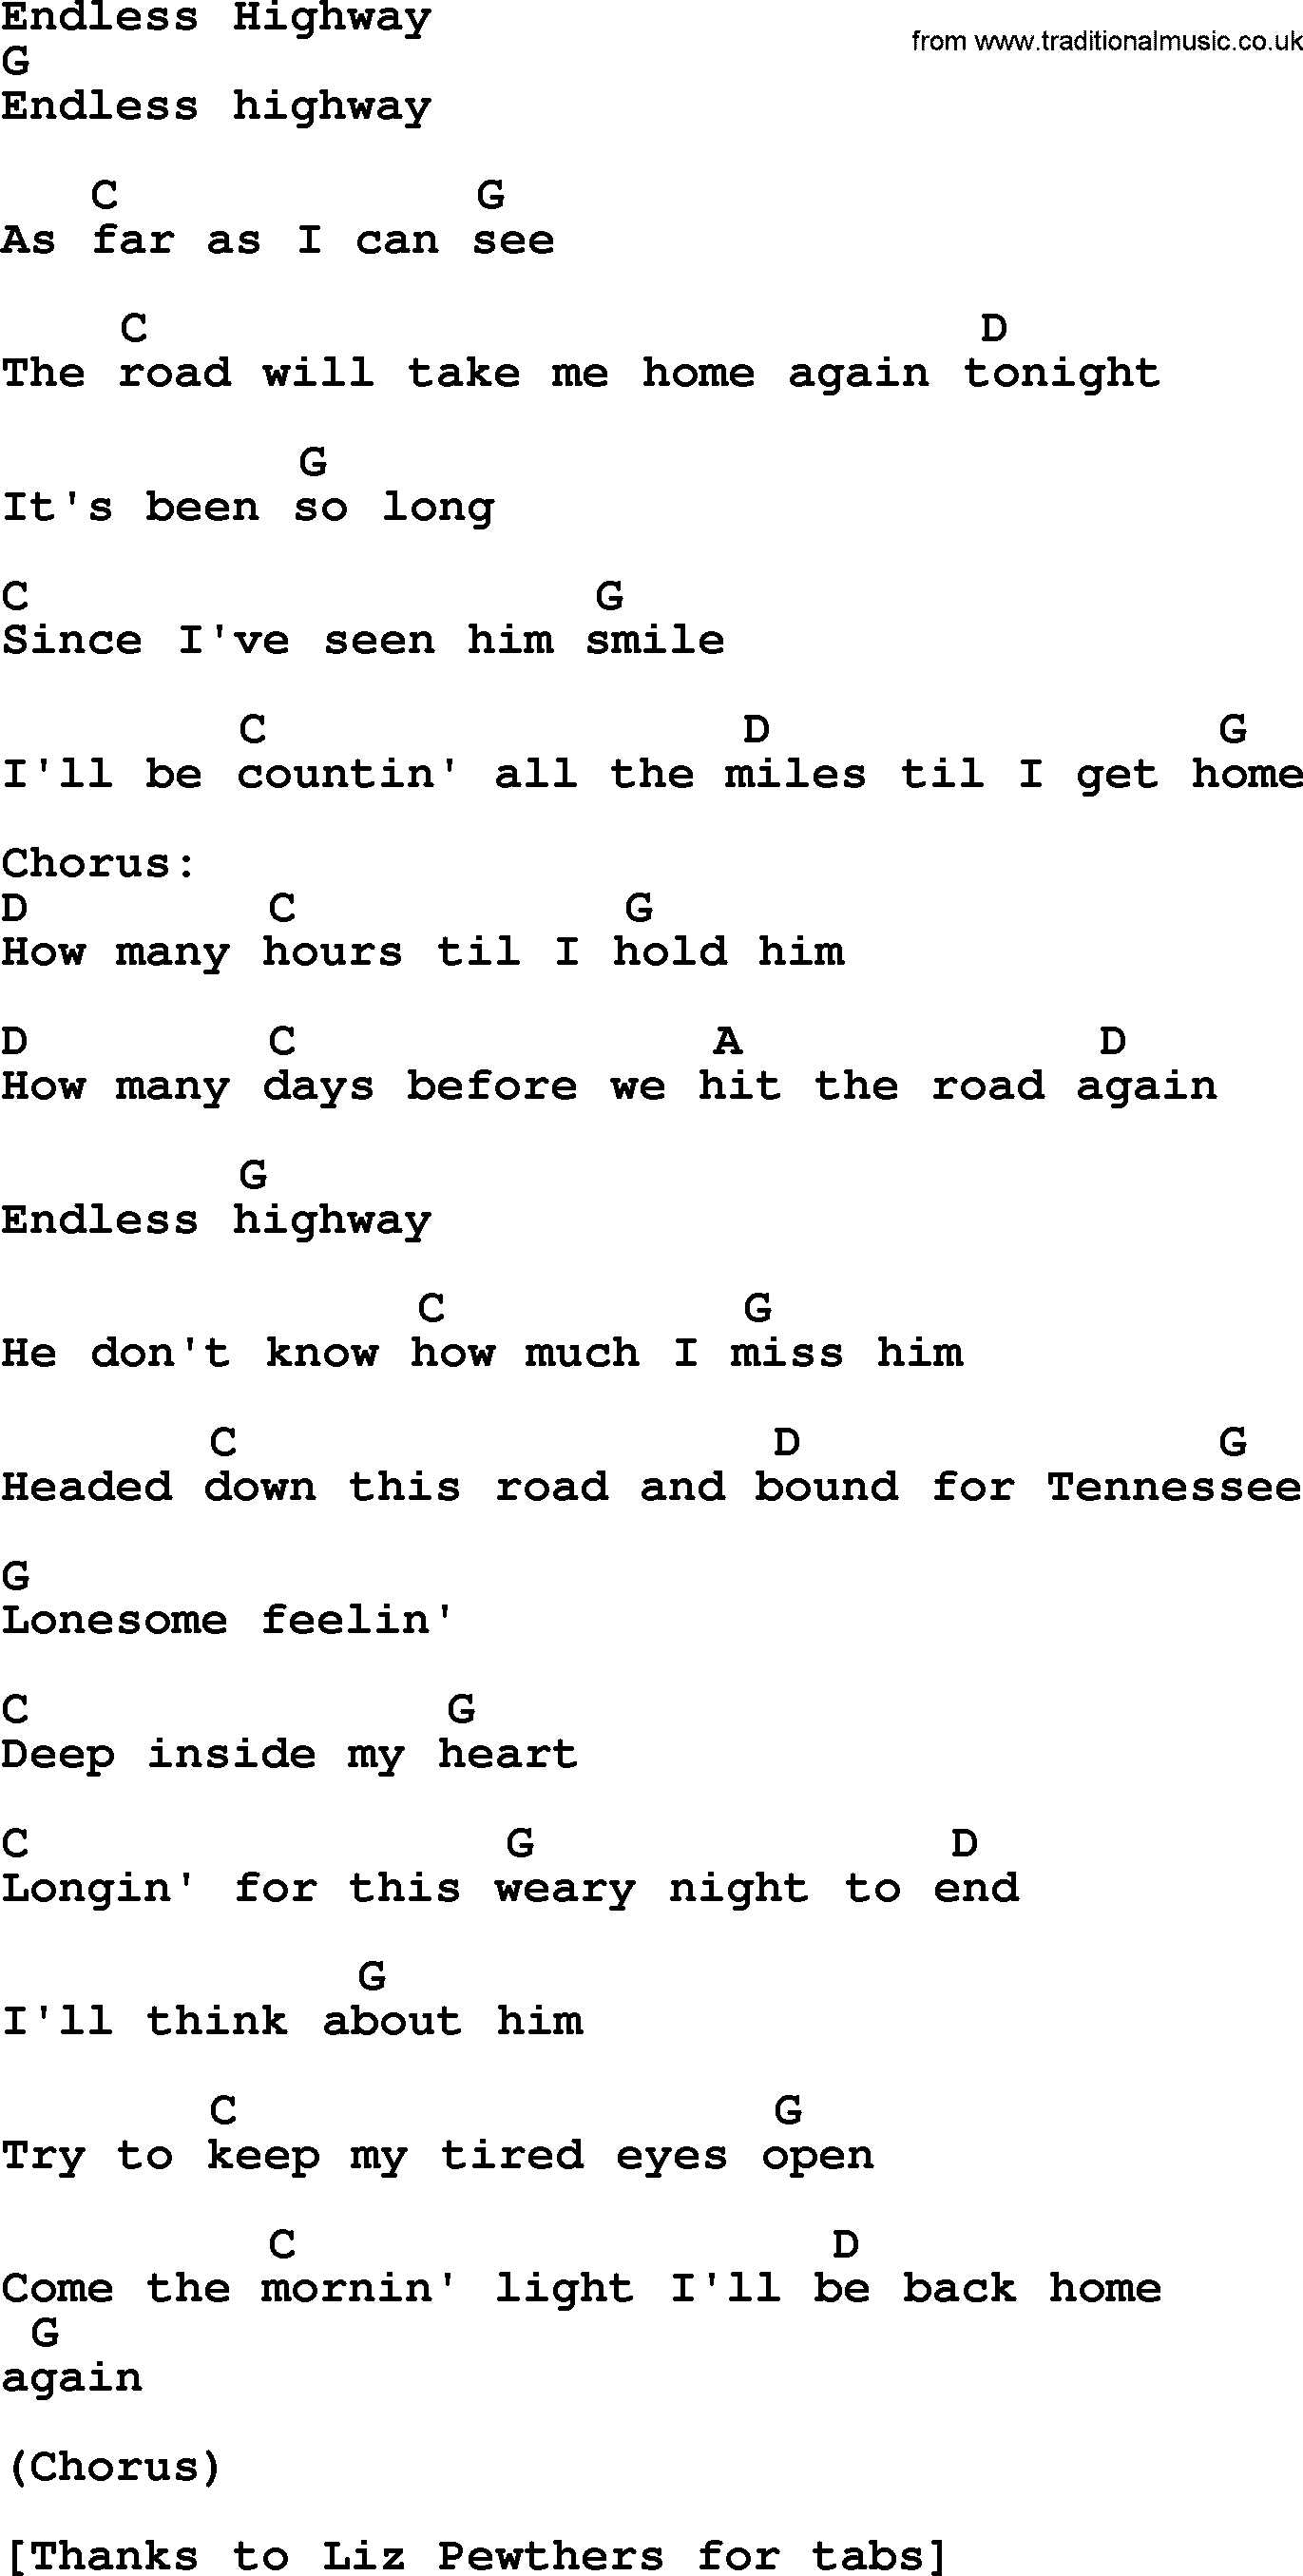 Bluegrass song: Endless Highway, lyrics and chords